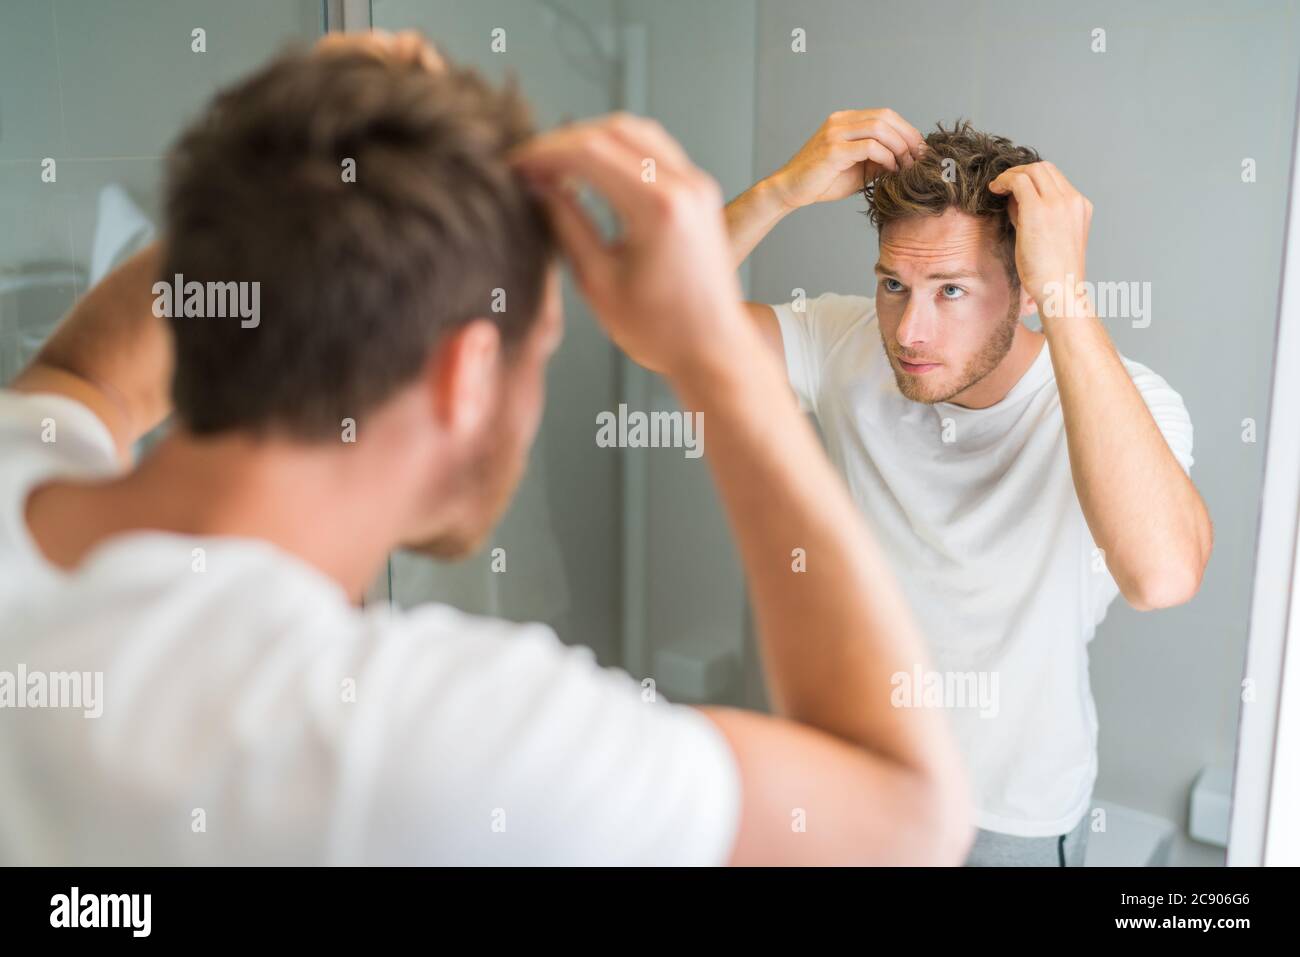 Hair loss man looking in bathroom mirror putting wax touching his hair styling or checking for hair loss problem. Male problem of losing hairs Stock Photo